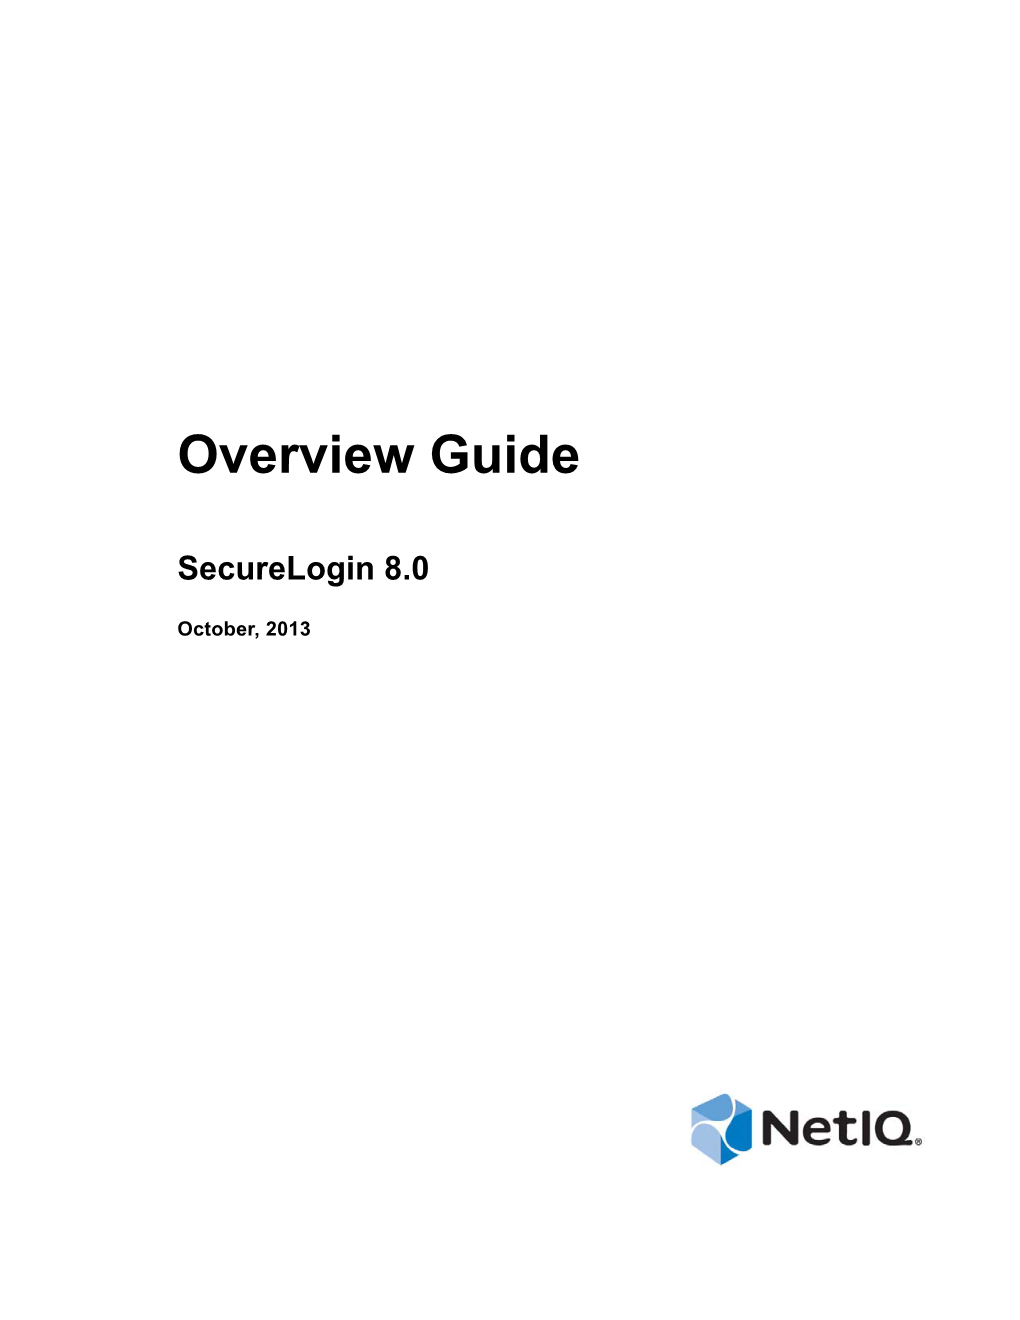 Netiq Securelogin Overview Guide About This Guide